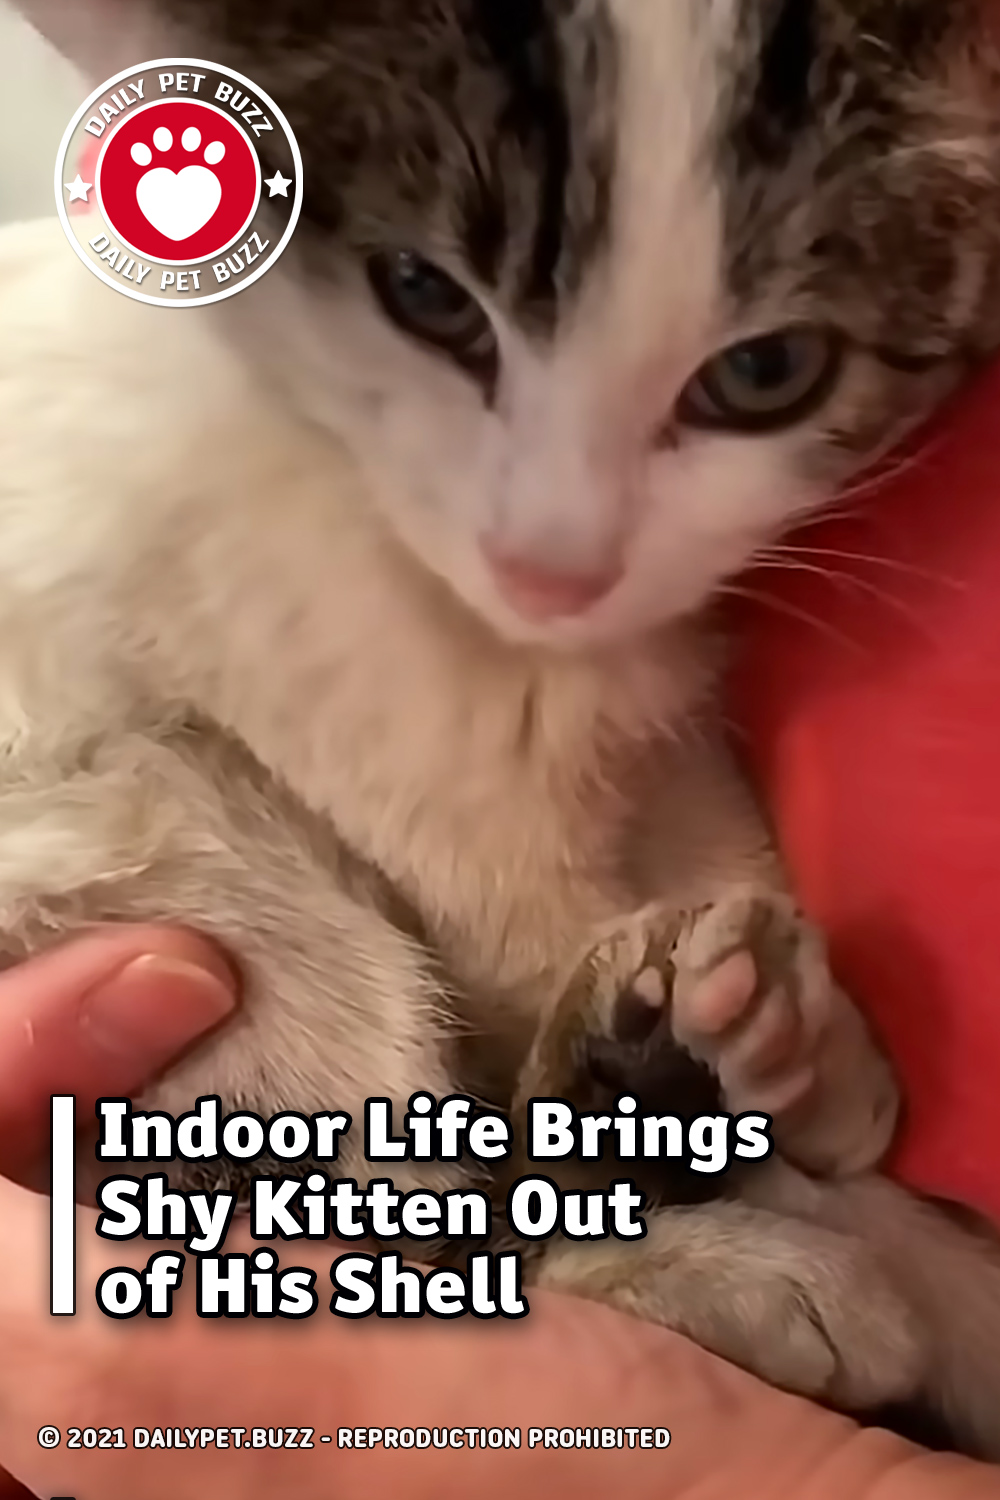 Indoor Life Brings Shy Kitten Out of His Shell